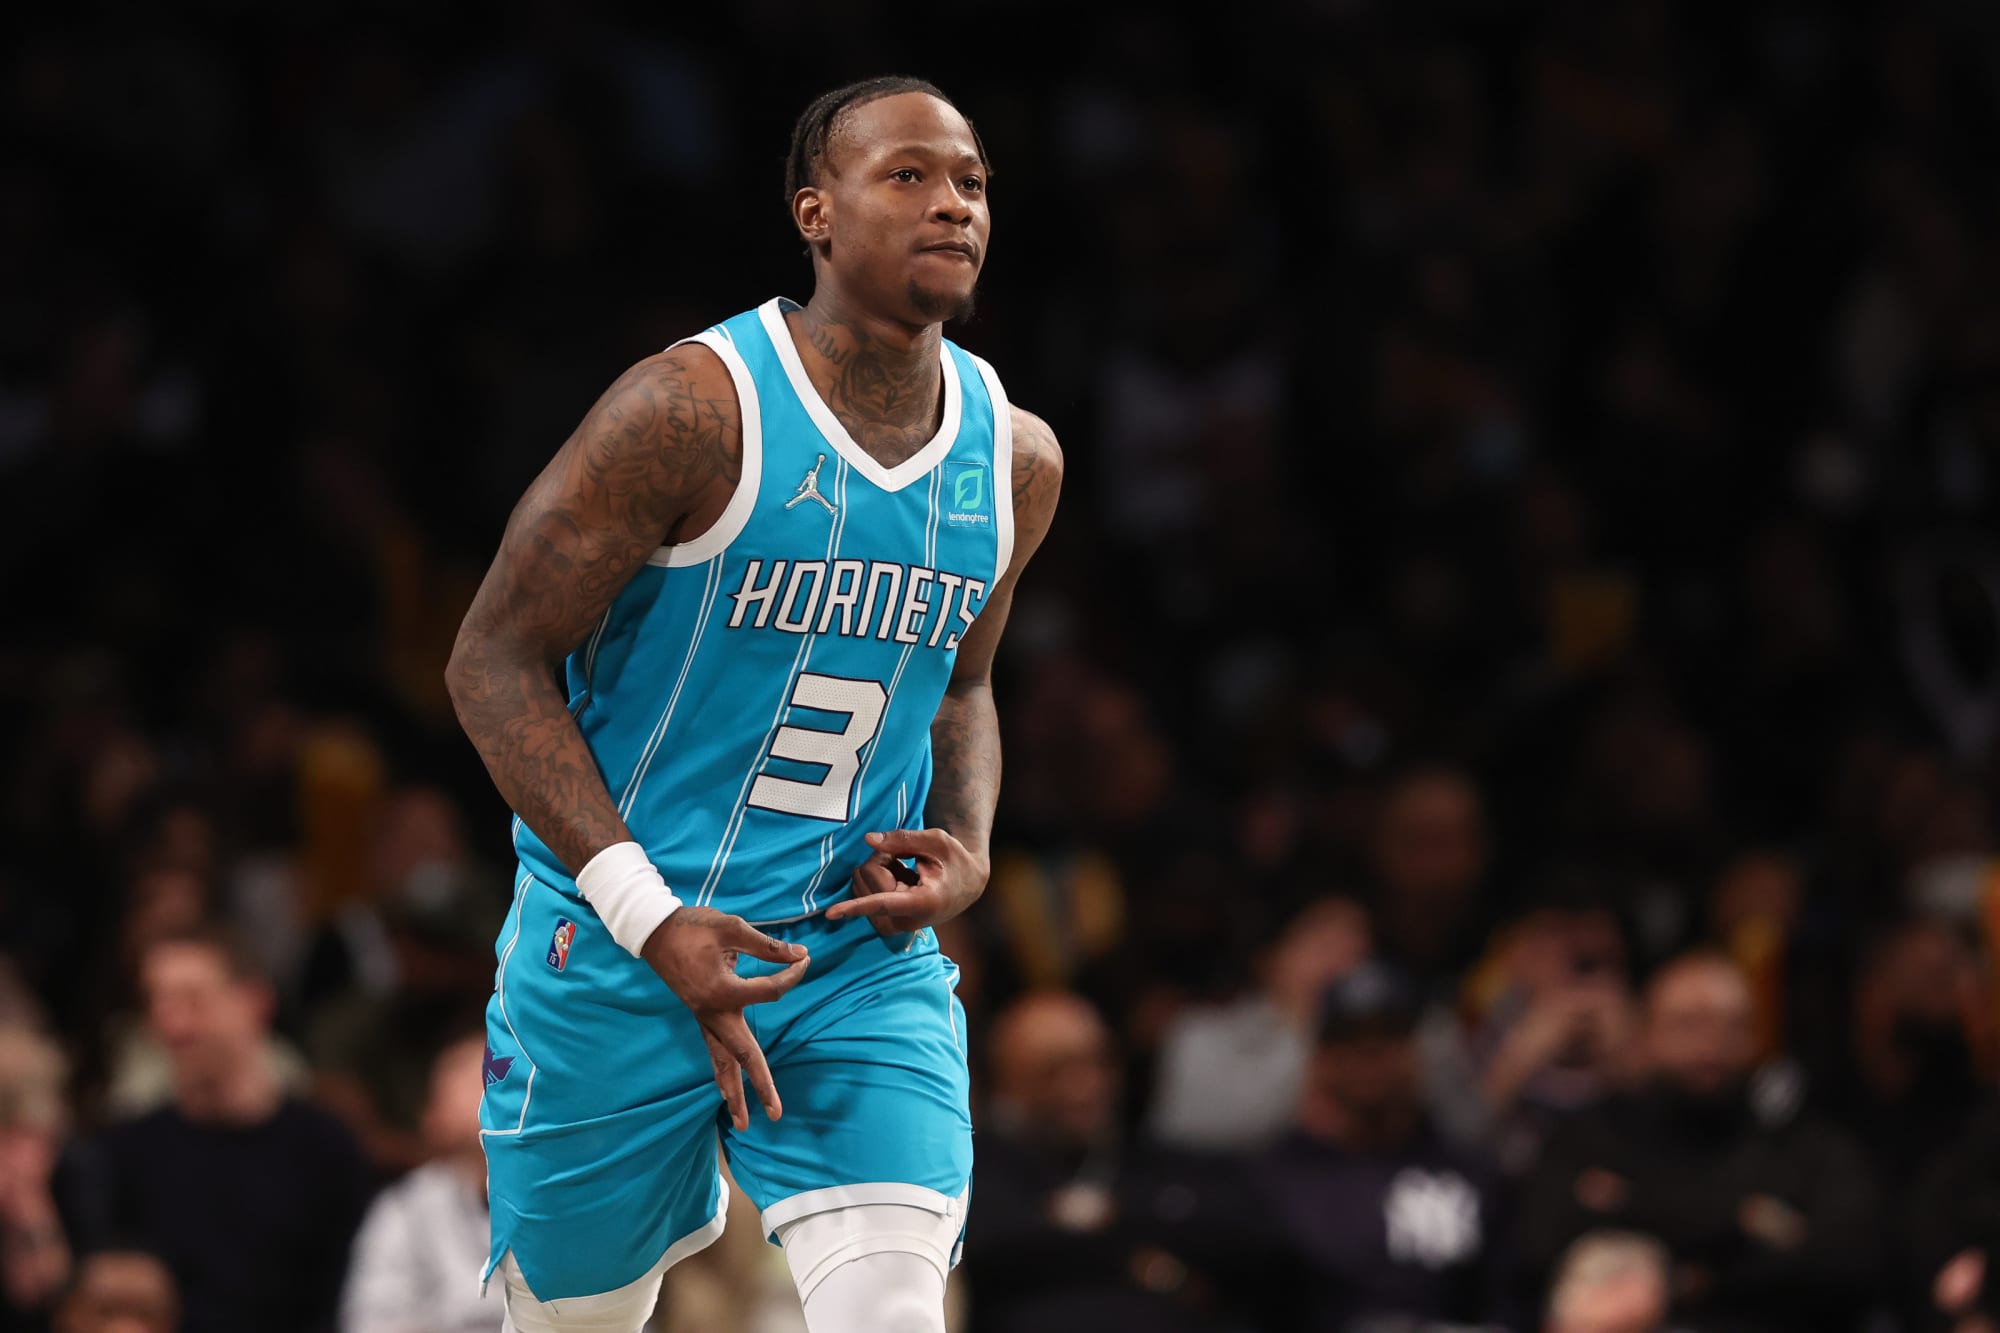 No Trade for Hornets Vet Terry Rozier Despite 'Down' Year